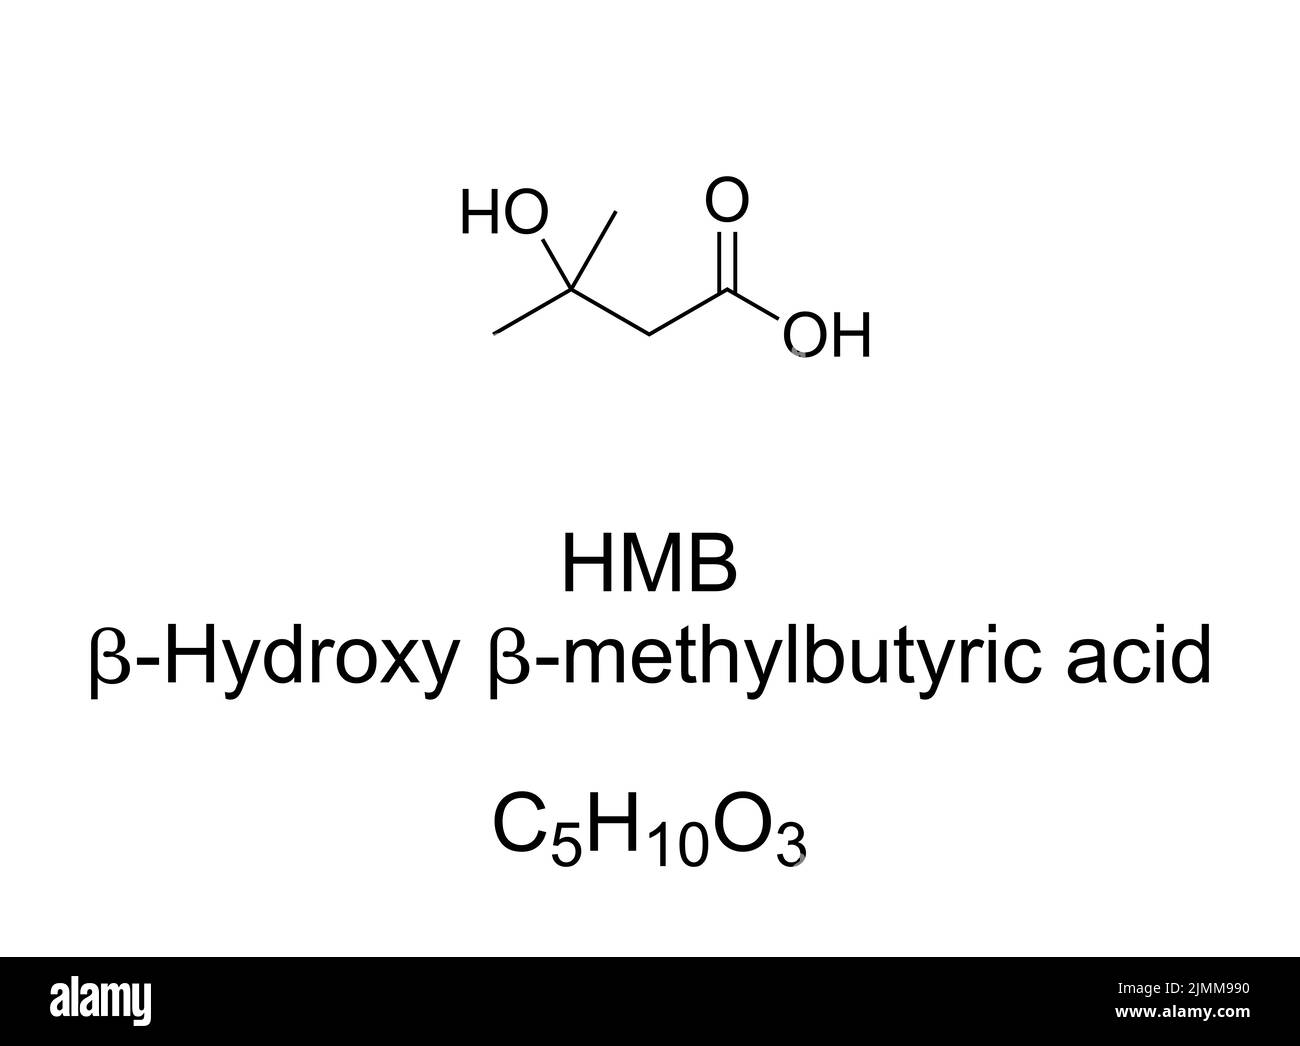 HMB, beta-Hydroxy beta-methylbutyric acid, chemical formula. Naturally produced substance, used as dietary supplement, and medical food ingredient. Stock Photo